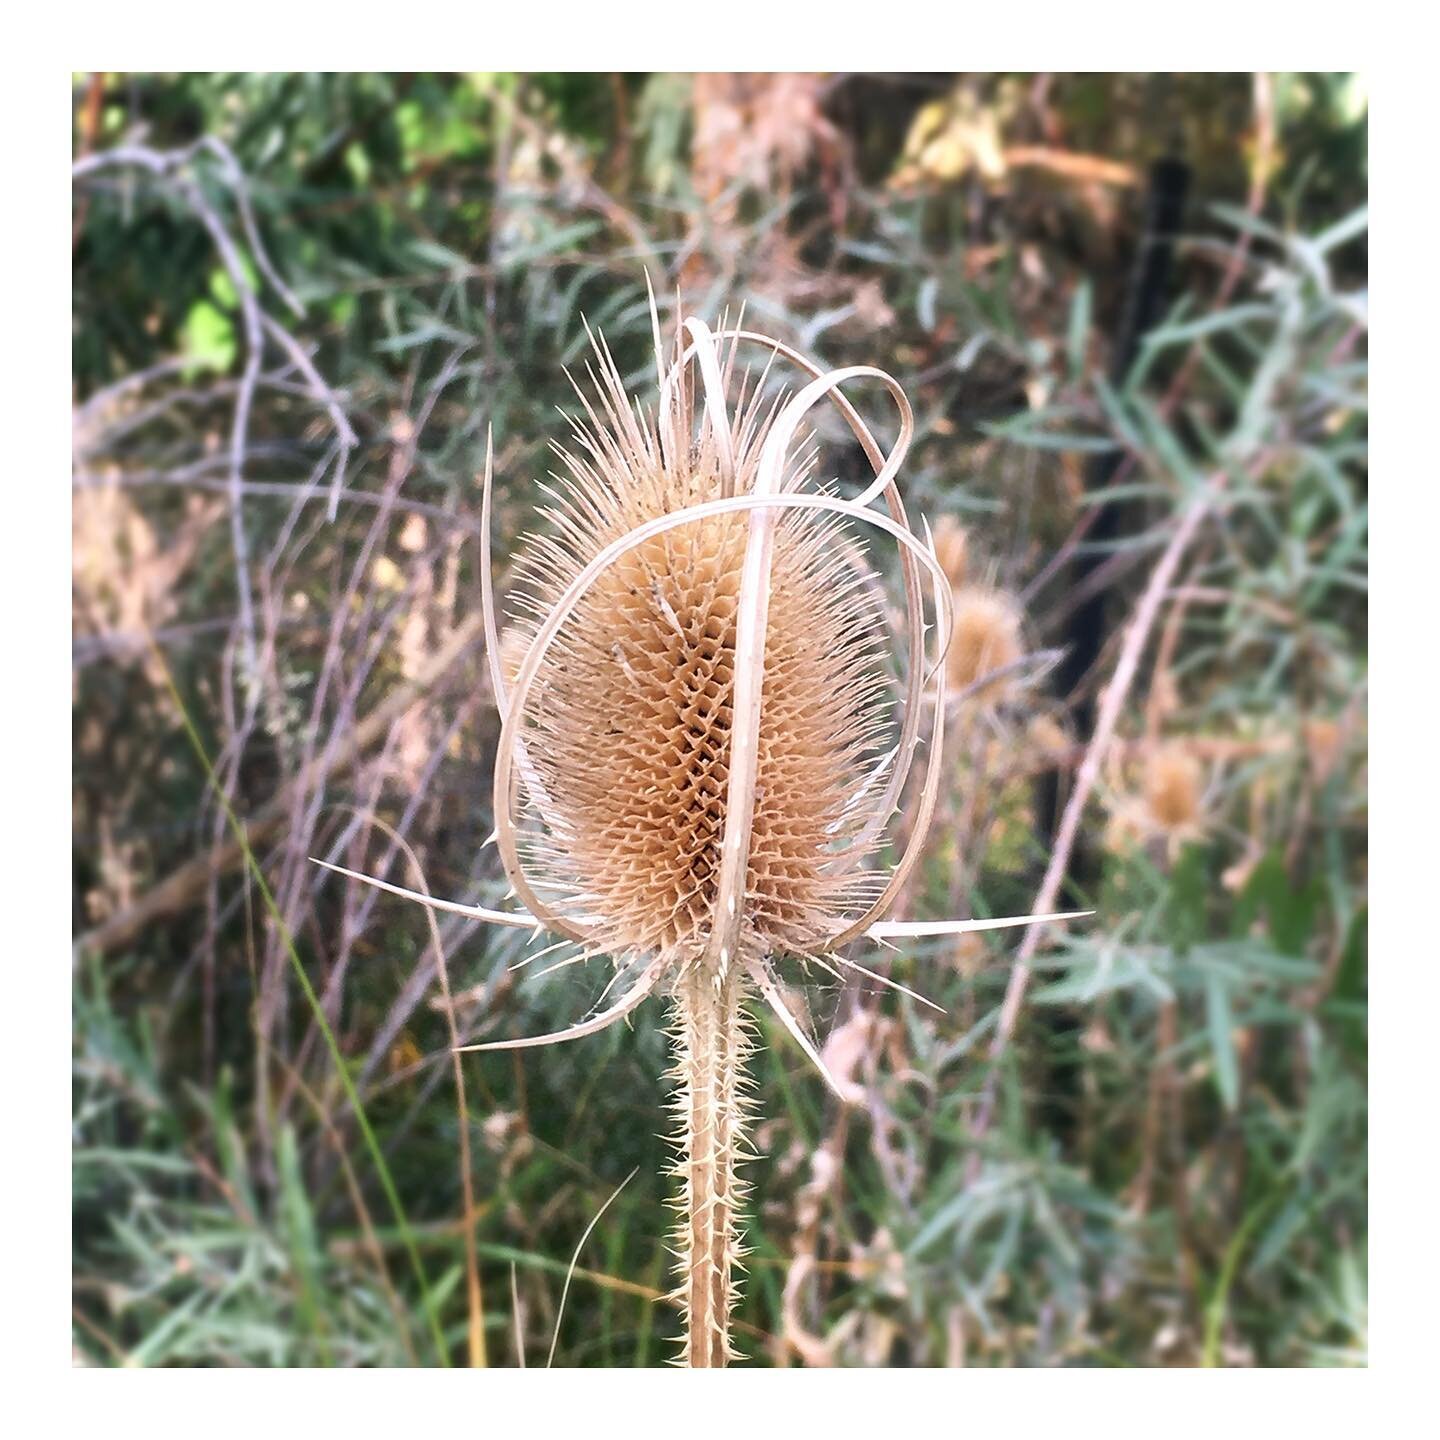 wild teasel 
(dipsacus fullonum)
native to Eurasia and North Africa, considered invasive in the U.S
formerly used for textile processing, specifically for combing wool
Marshall Mesa, Fall 2020